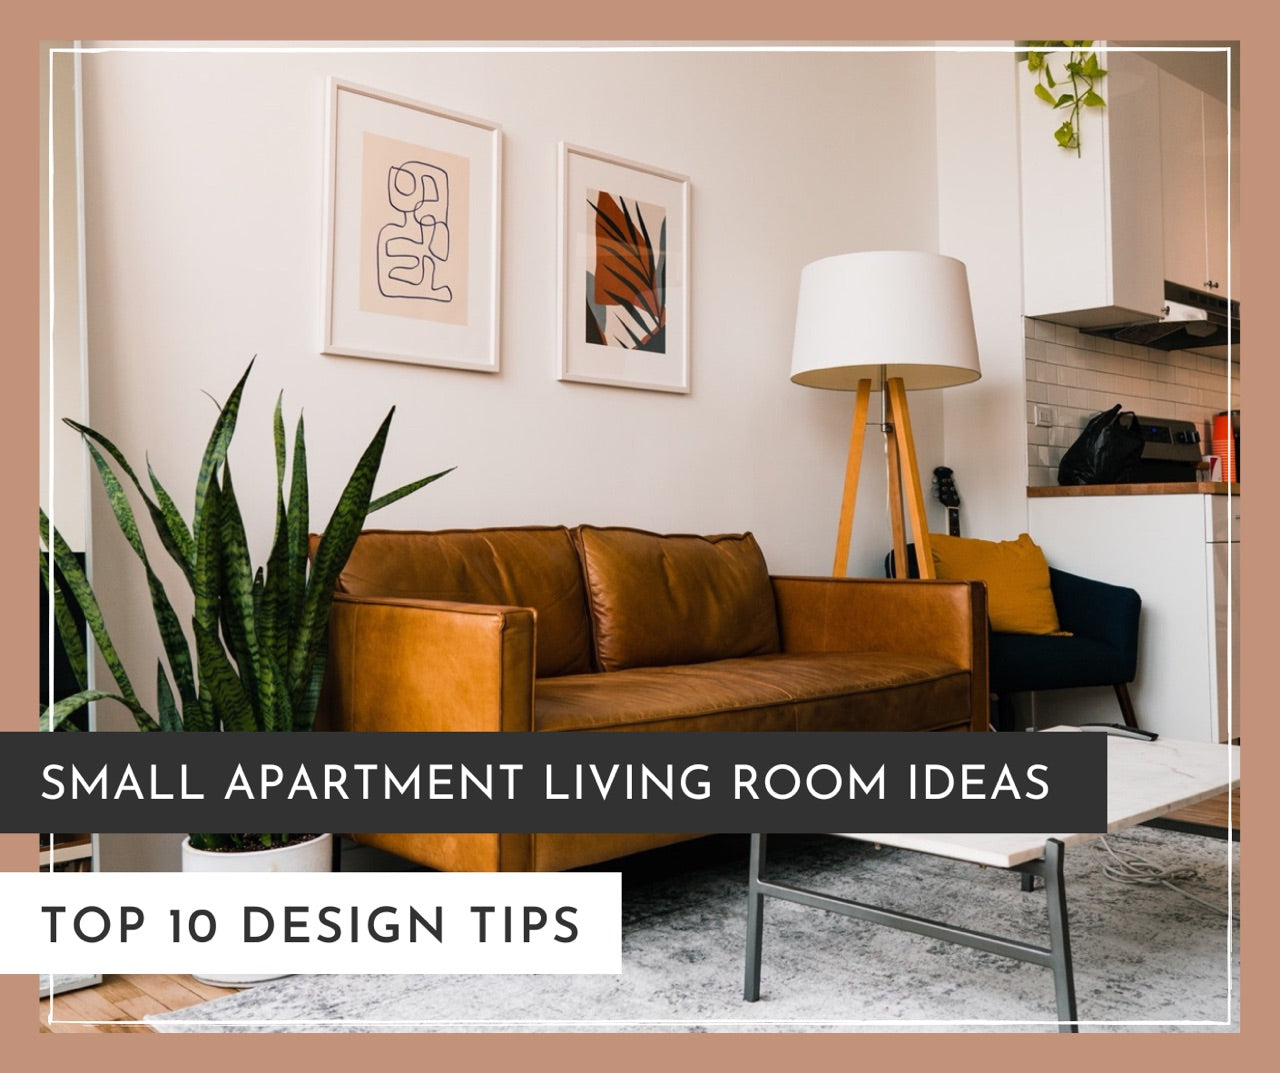 Furniture Hacks and Other Small Apartment Ideas